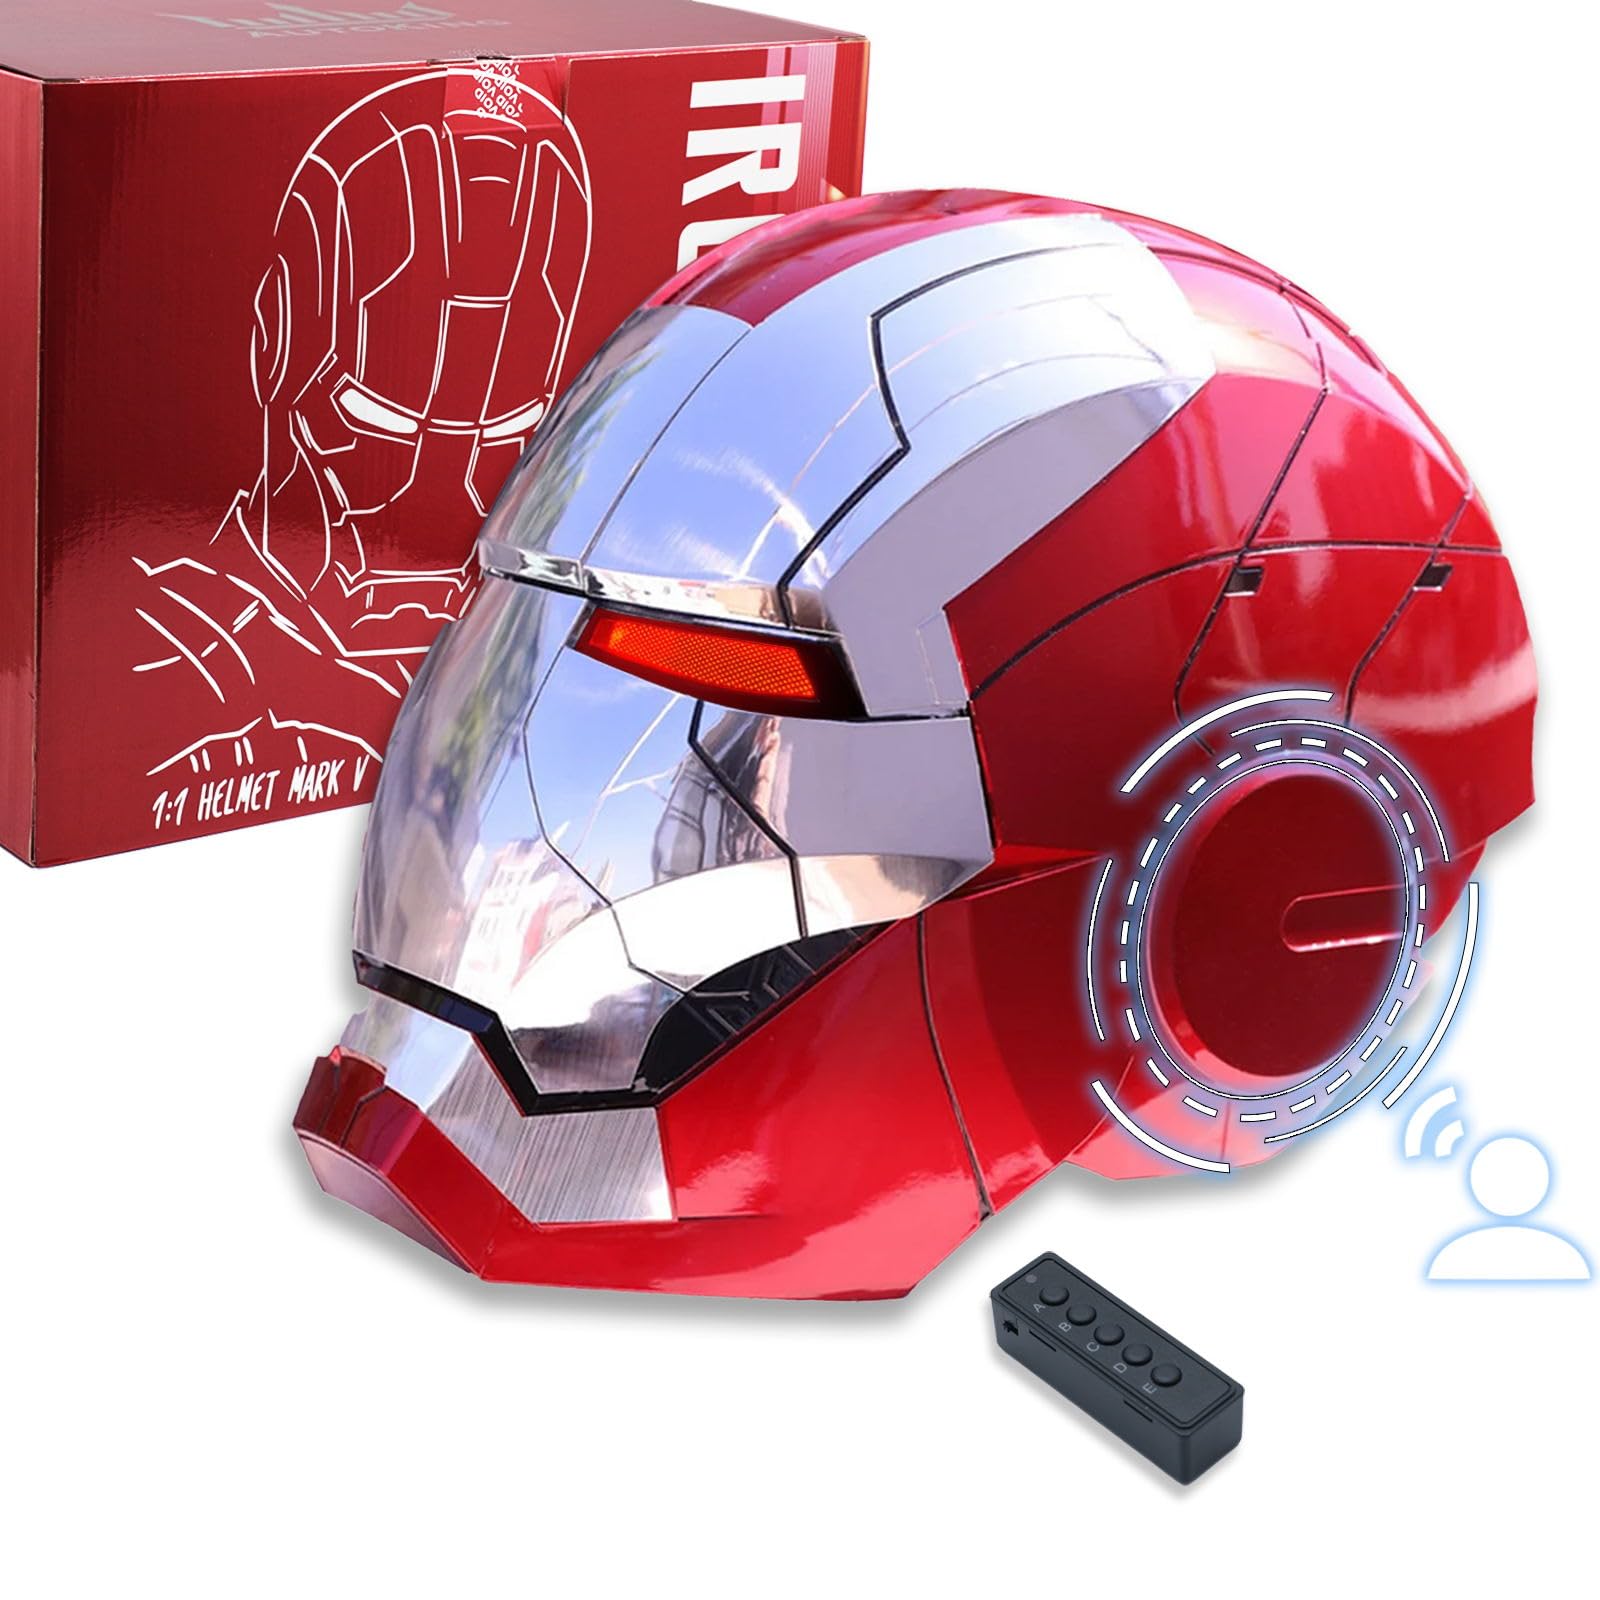 Iron-Mans Helmet Adult Electronic Mark 5 Helmet With Jarvis Voice/Sensing/Remote Control Open/Close Sounds & LED Eyes Light Up Super Hero 1:1 Model Prop for Halloween Christmas Gift.